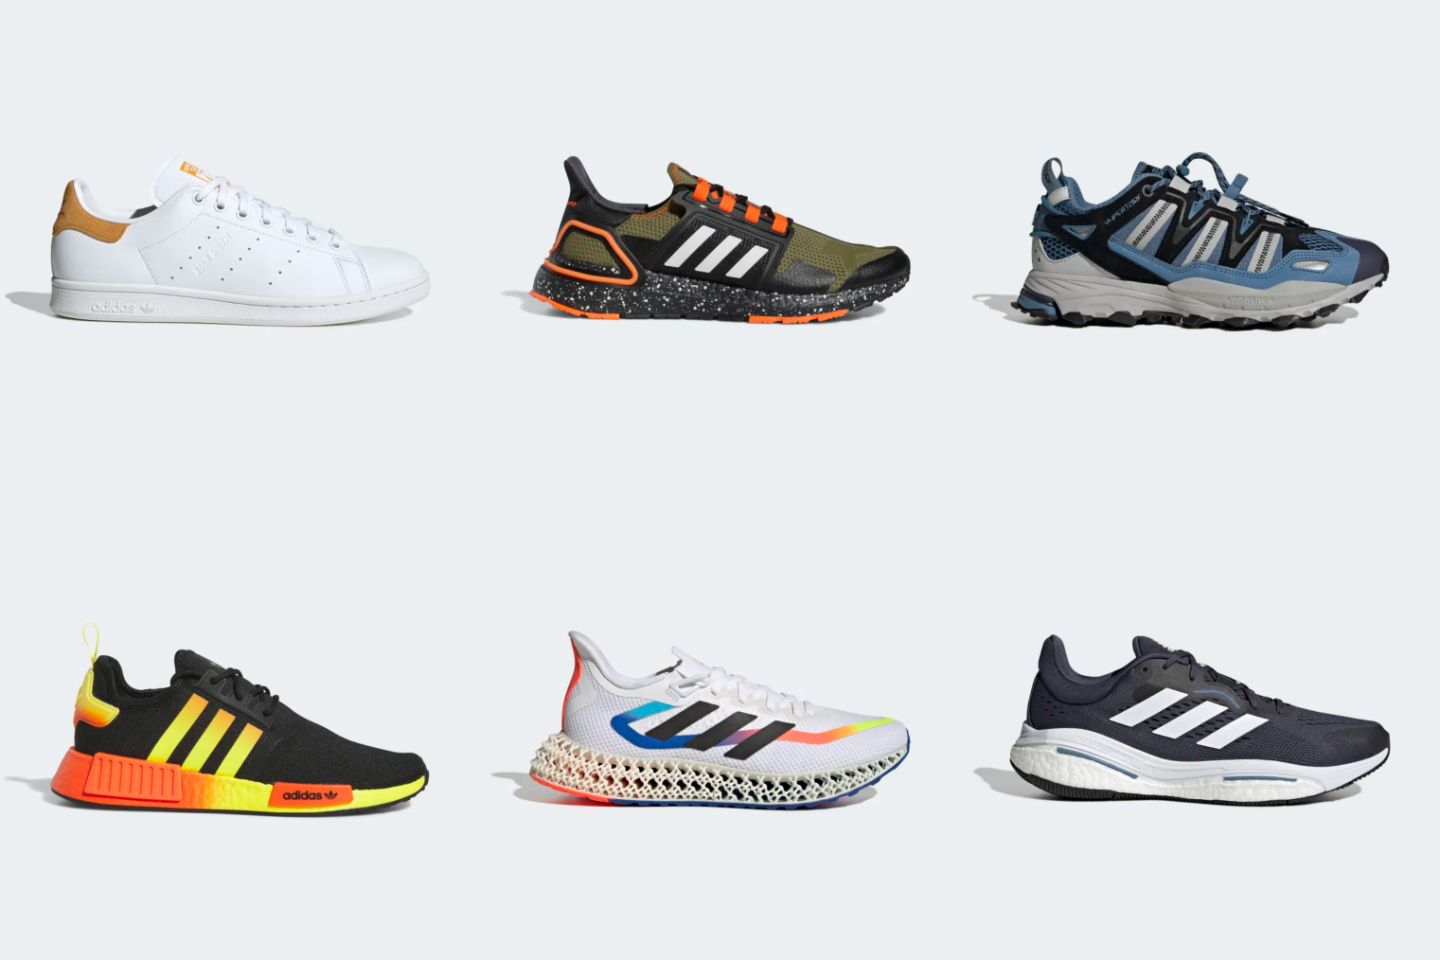 adidas End Of Year Sale Features Select Styles Up To 60% off - BroBible